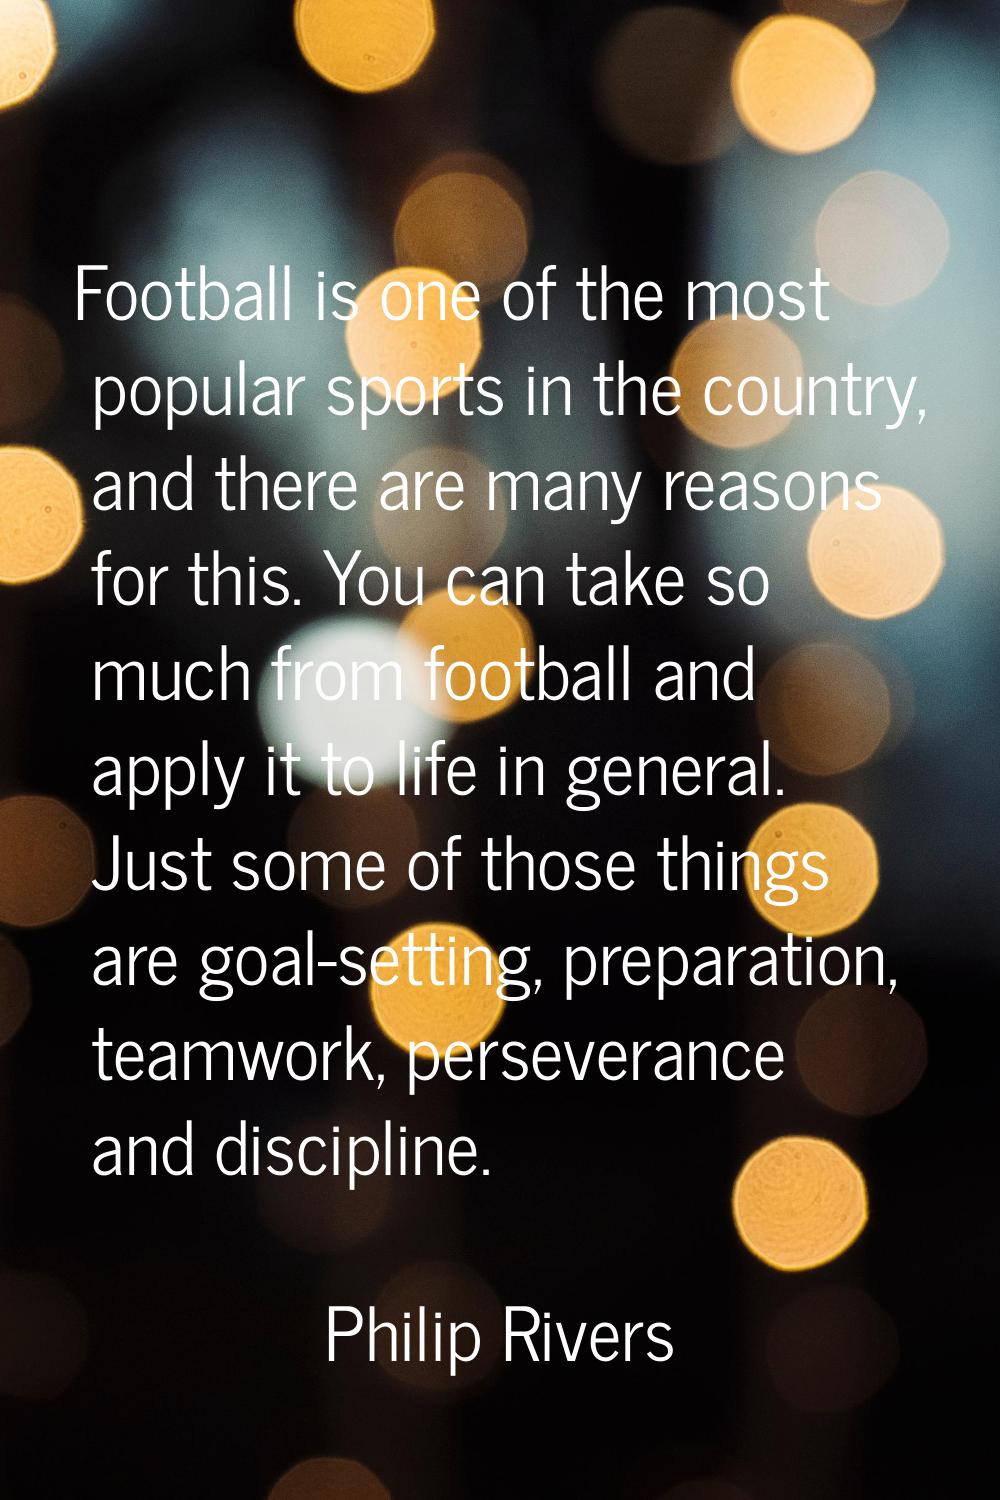 Football is one of the most popular sports in the country, and there are many reasons for this. You